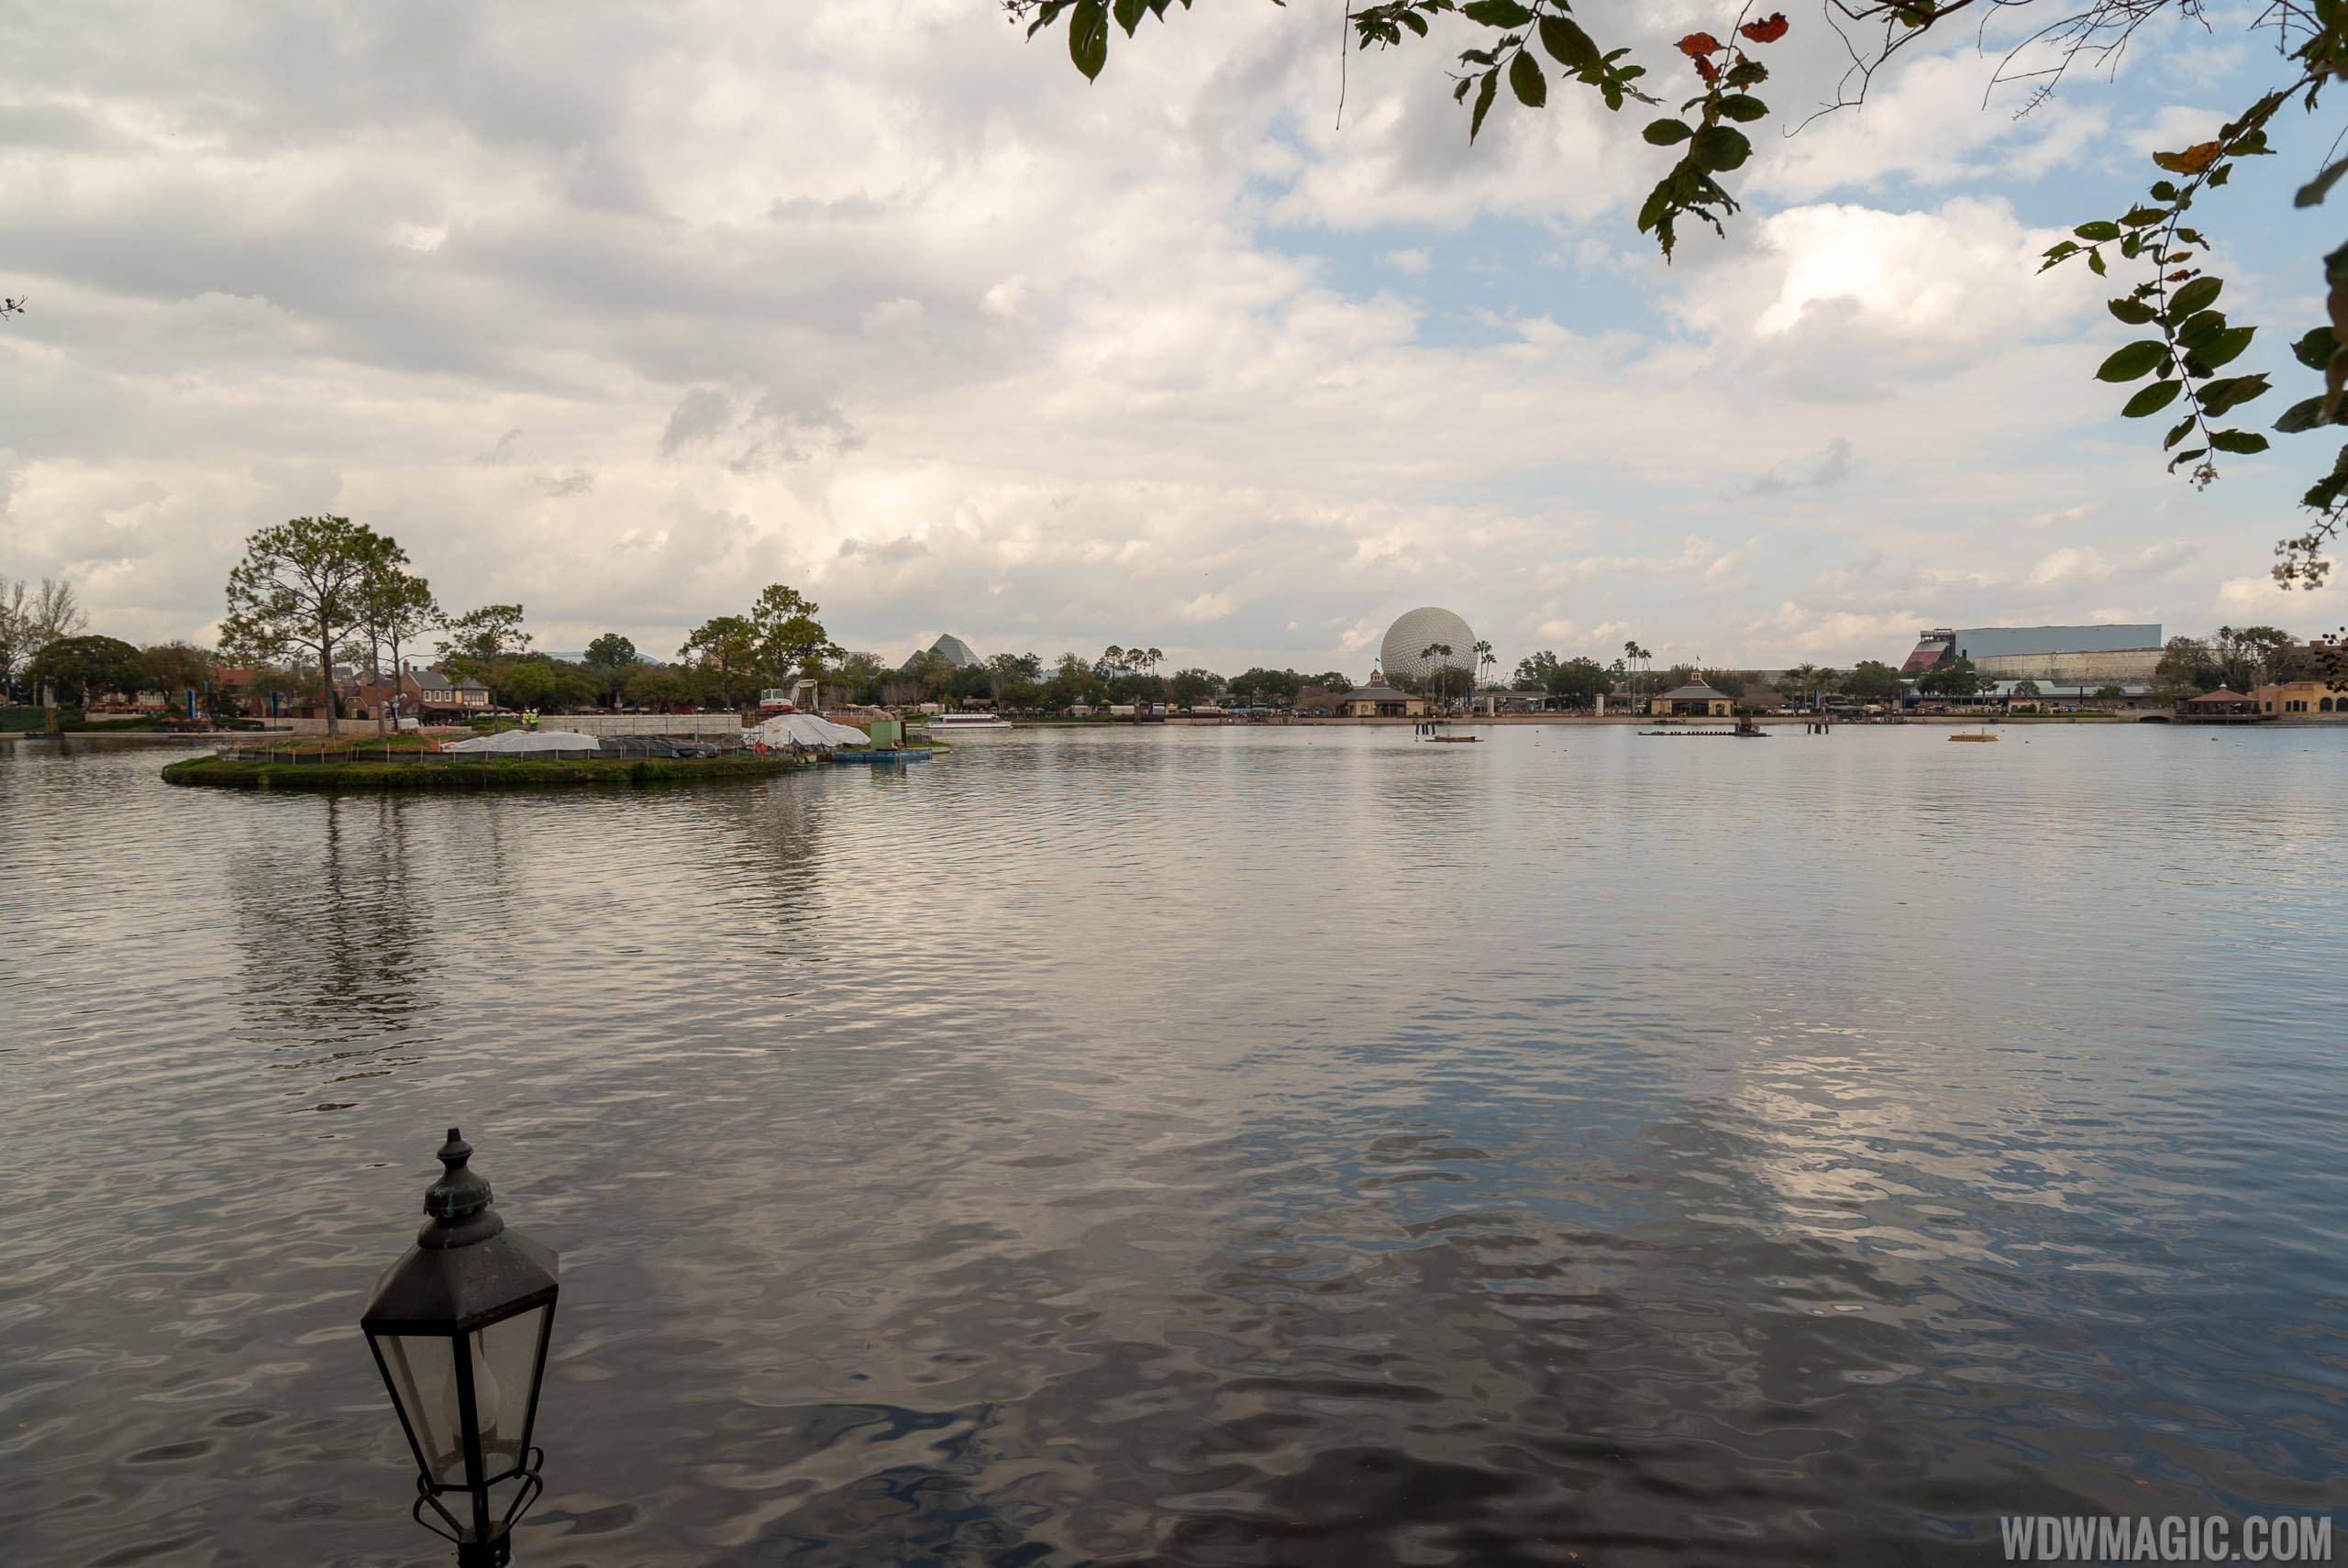 PHOTOS - Work continues in the World Showcase Lagoon for new Epcot nighttime spectaculars